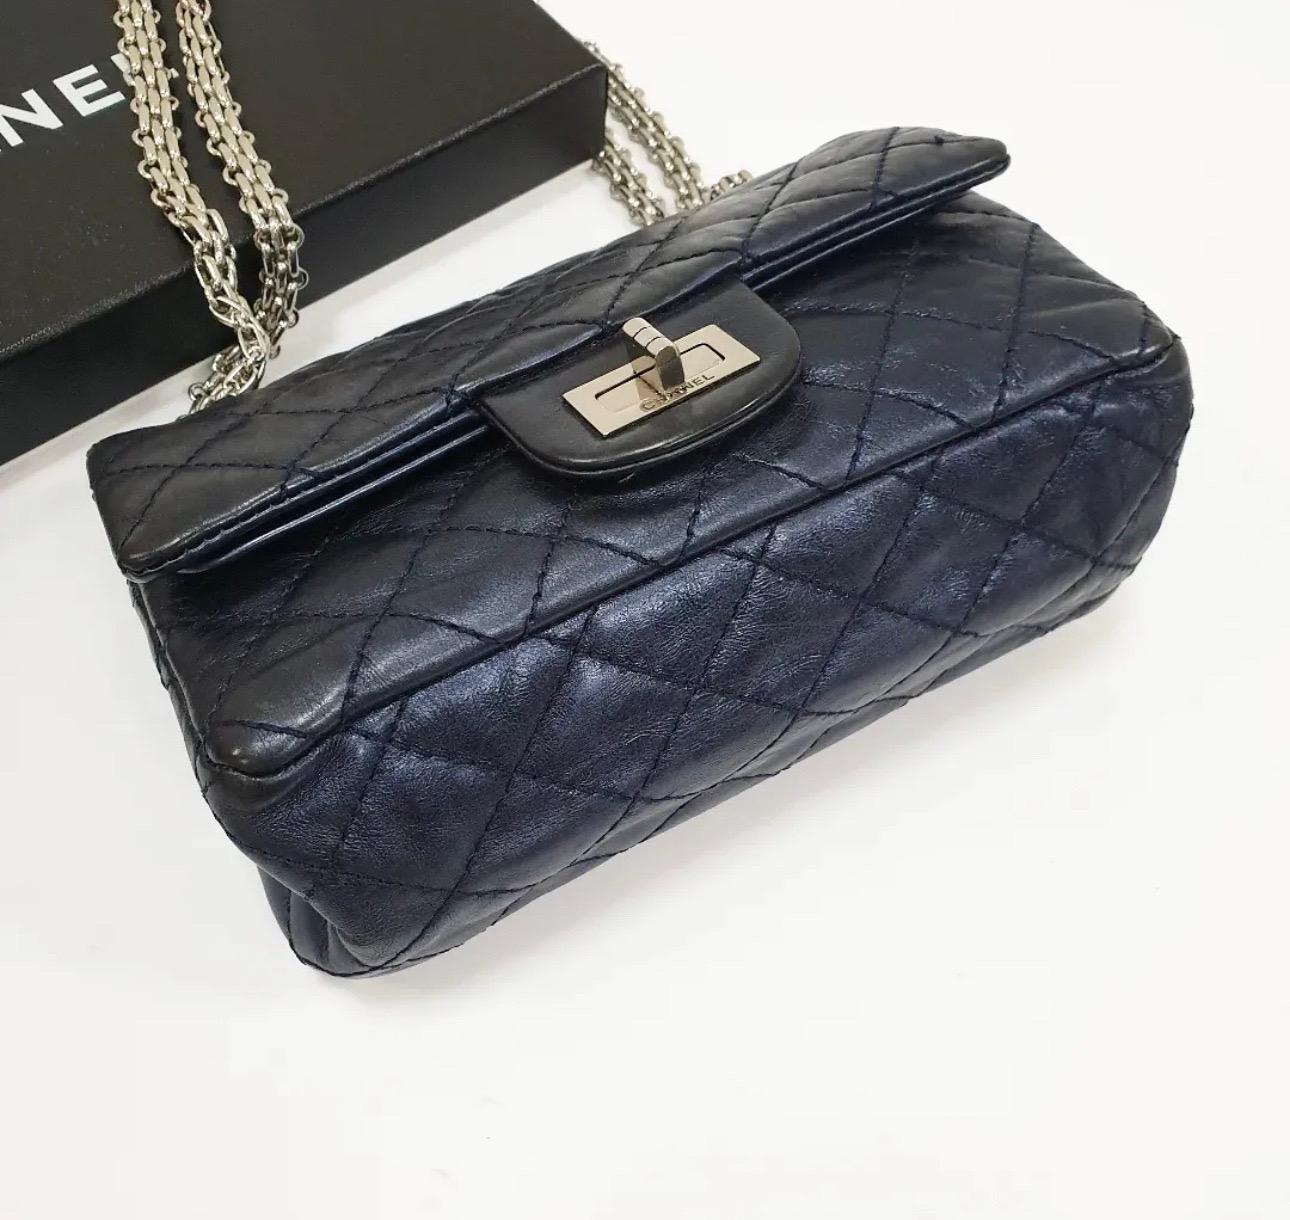 Chanel Metallic Blue Quilted Leather Reissue 2.55 Classic Flap Bag 4